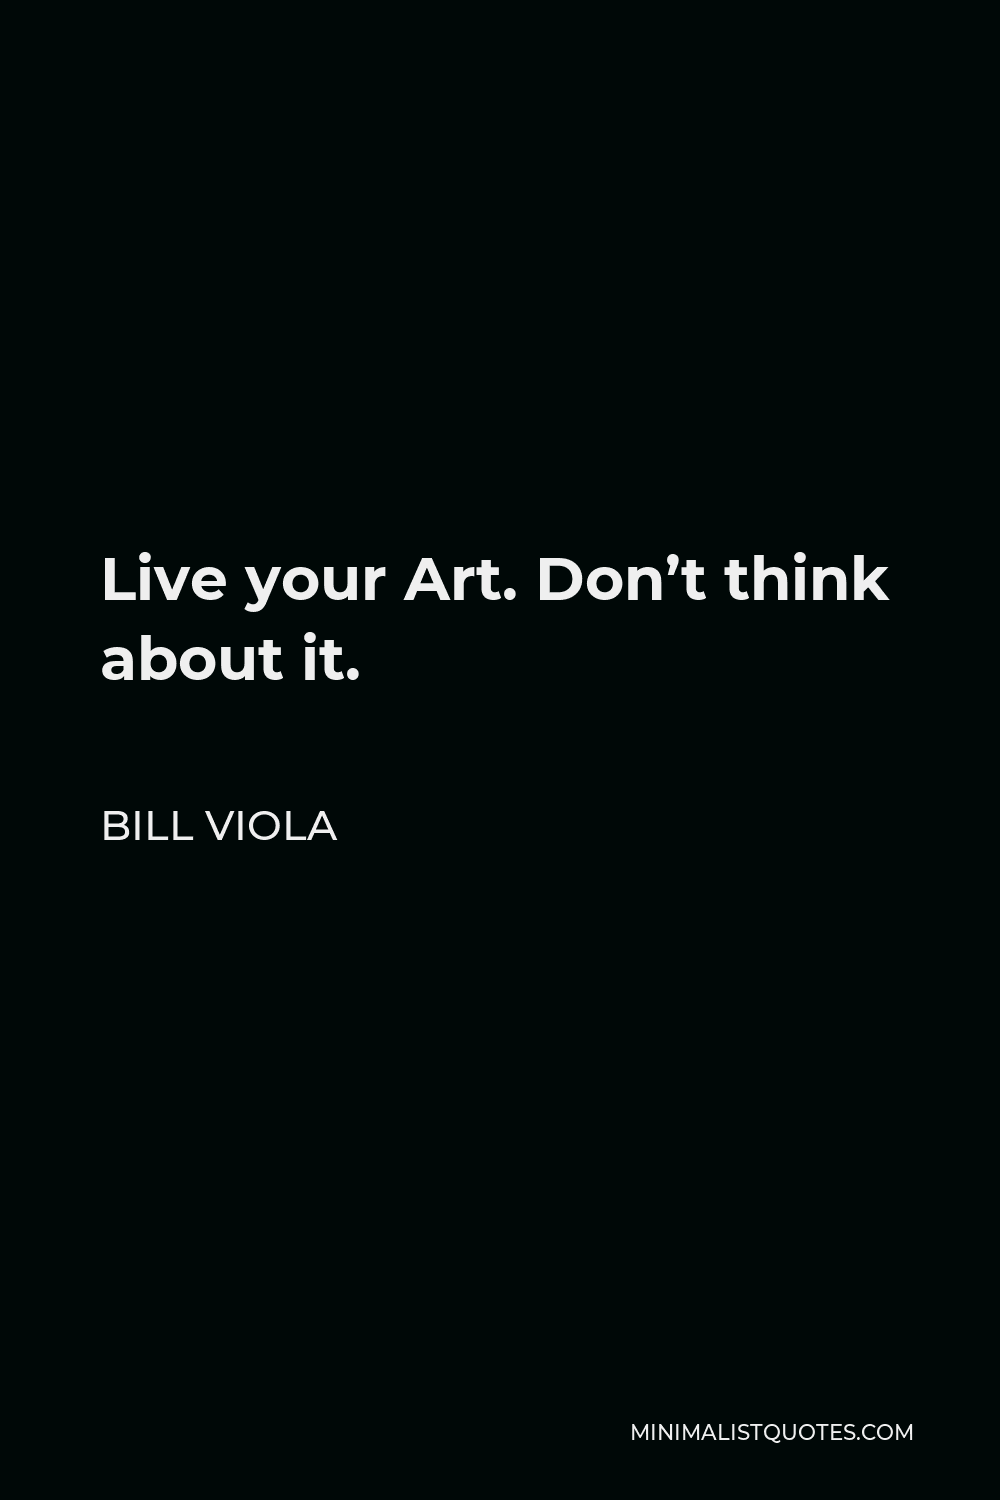 Bill Viola Quote - Live your Art. Don’t think about it.